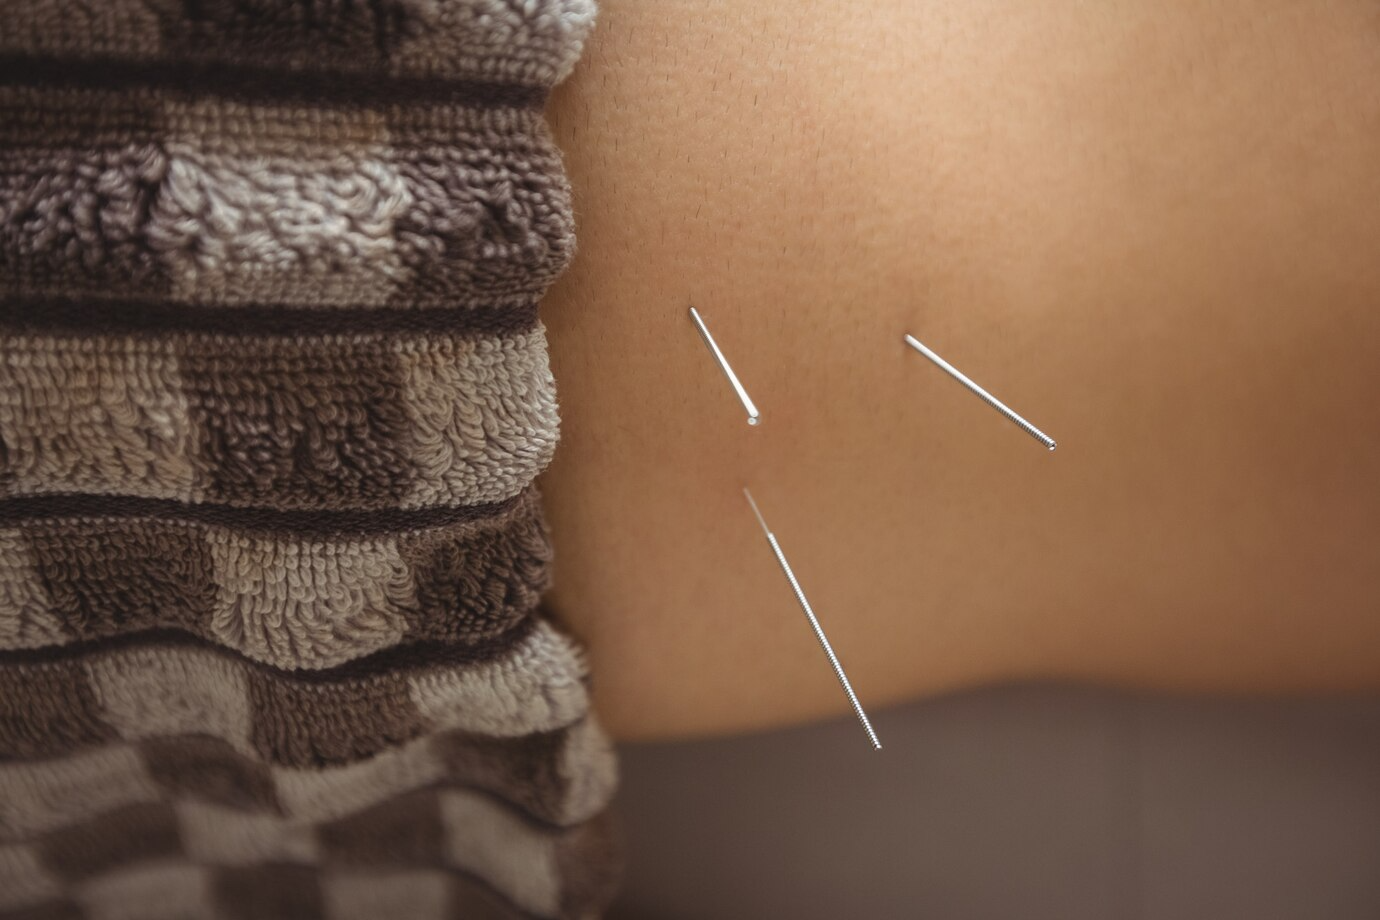 Therapy and Rehabilitation close up patient getting dry needling 107420 65830